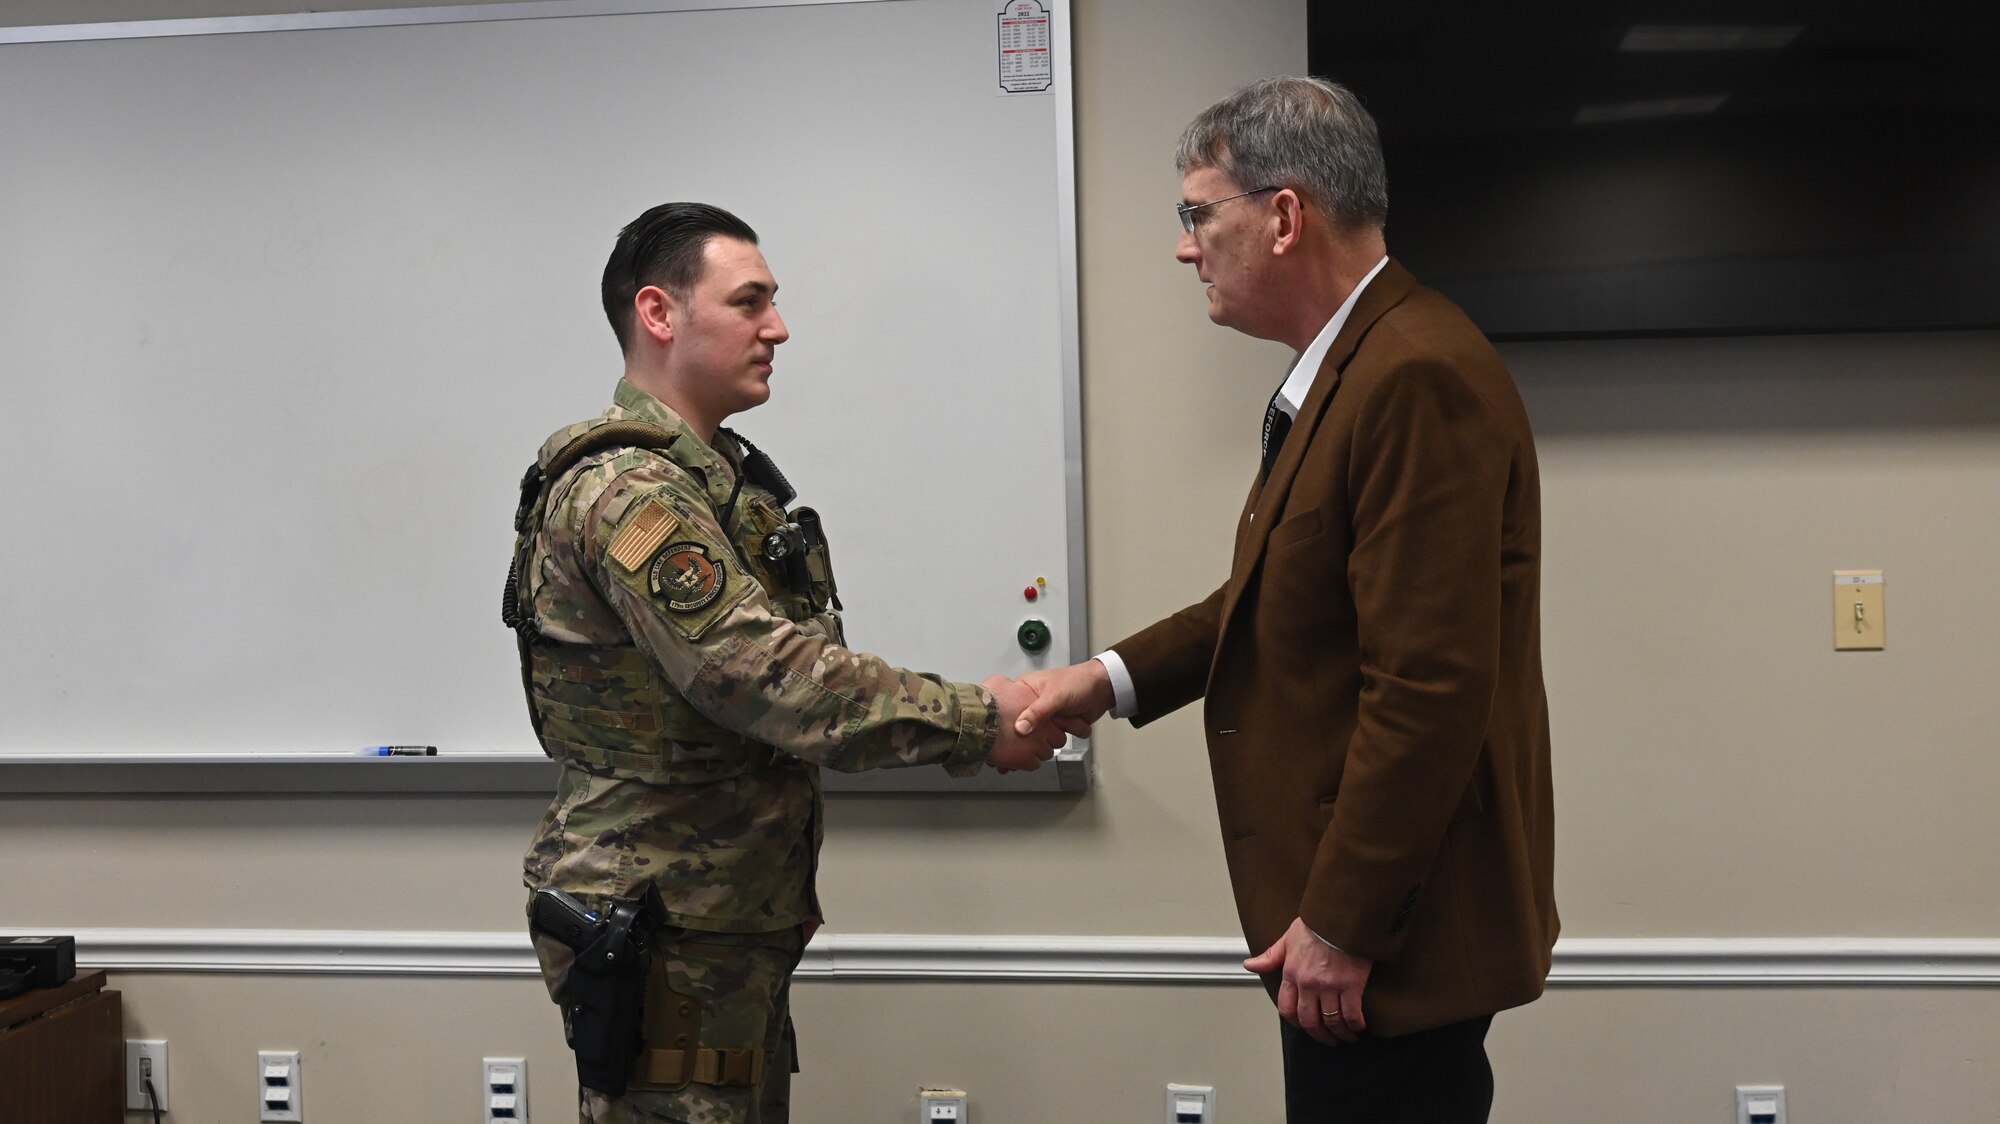 U.S. Air Force Tech. Sgt. Cameron Lincoln, left, assistant flight chief assigned to the 175th Security Forces Squadron, is coined by Mr. Devin Cate, executive director, Air National Guard, March 5, 2022, during a visit to Warfield Air National Guard Base at Martin State Airport, Middle River, Maryland.  During his visit, Cate recognized numerous Airmen for their outstanding service during.  (U.S. Air National Guard photo by A1C Alexandra Huettner)